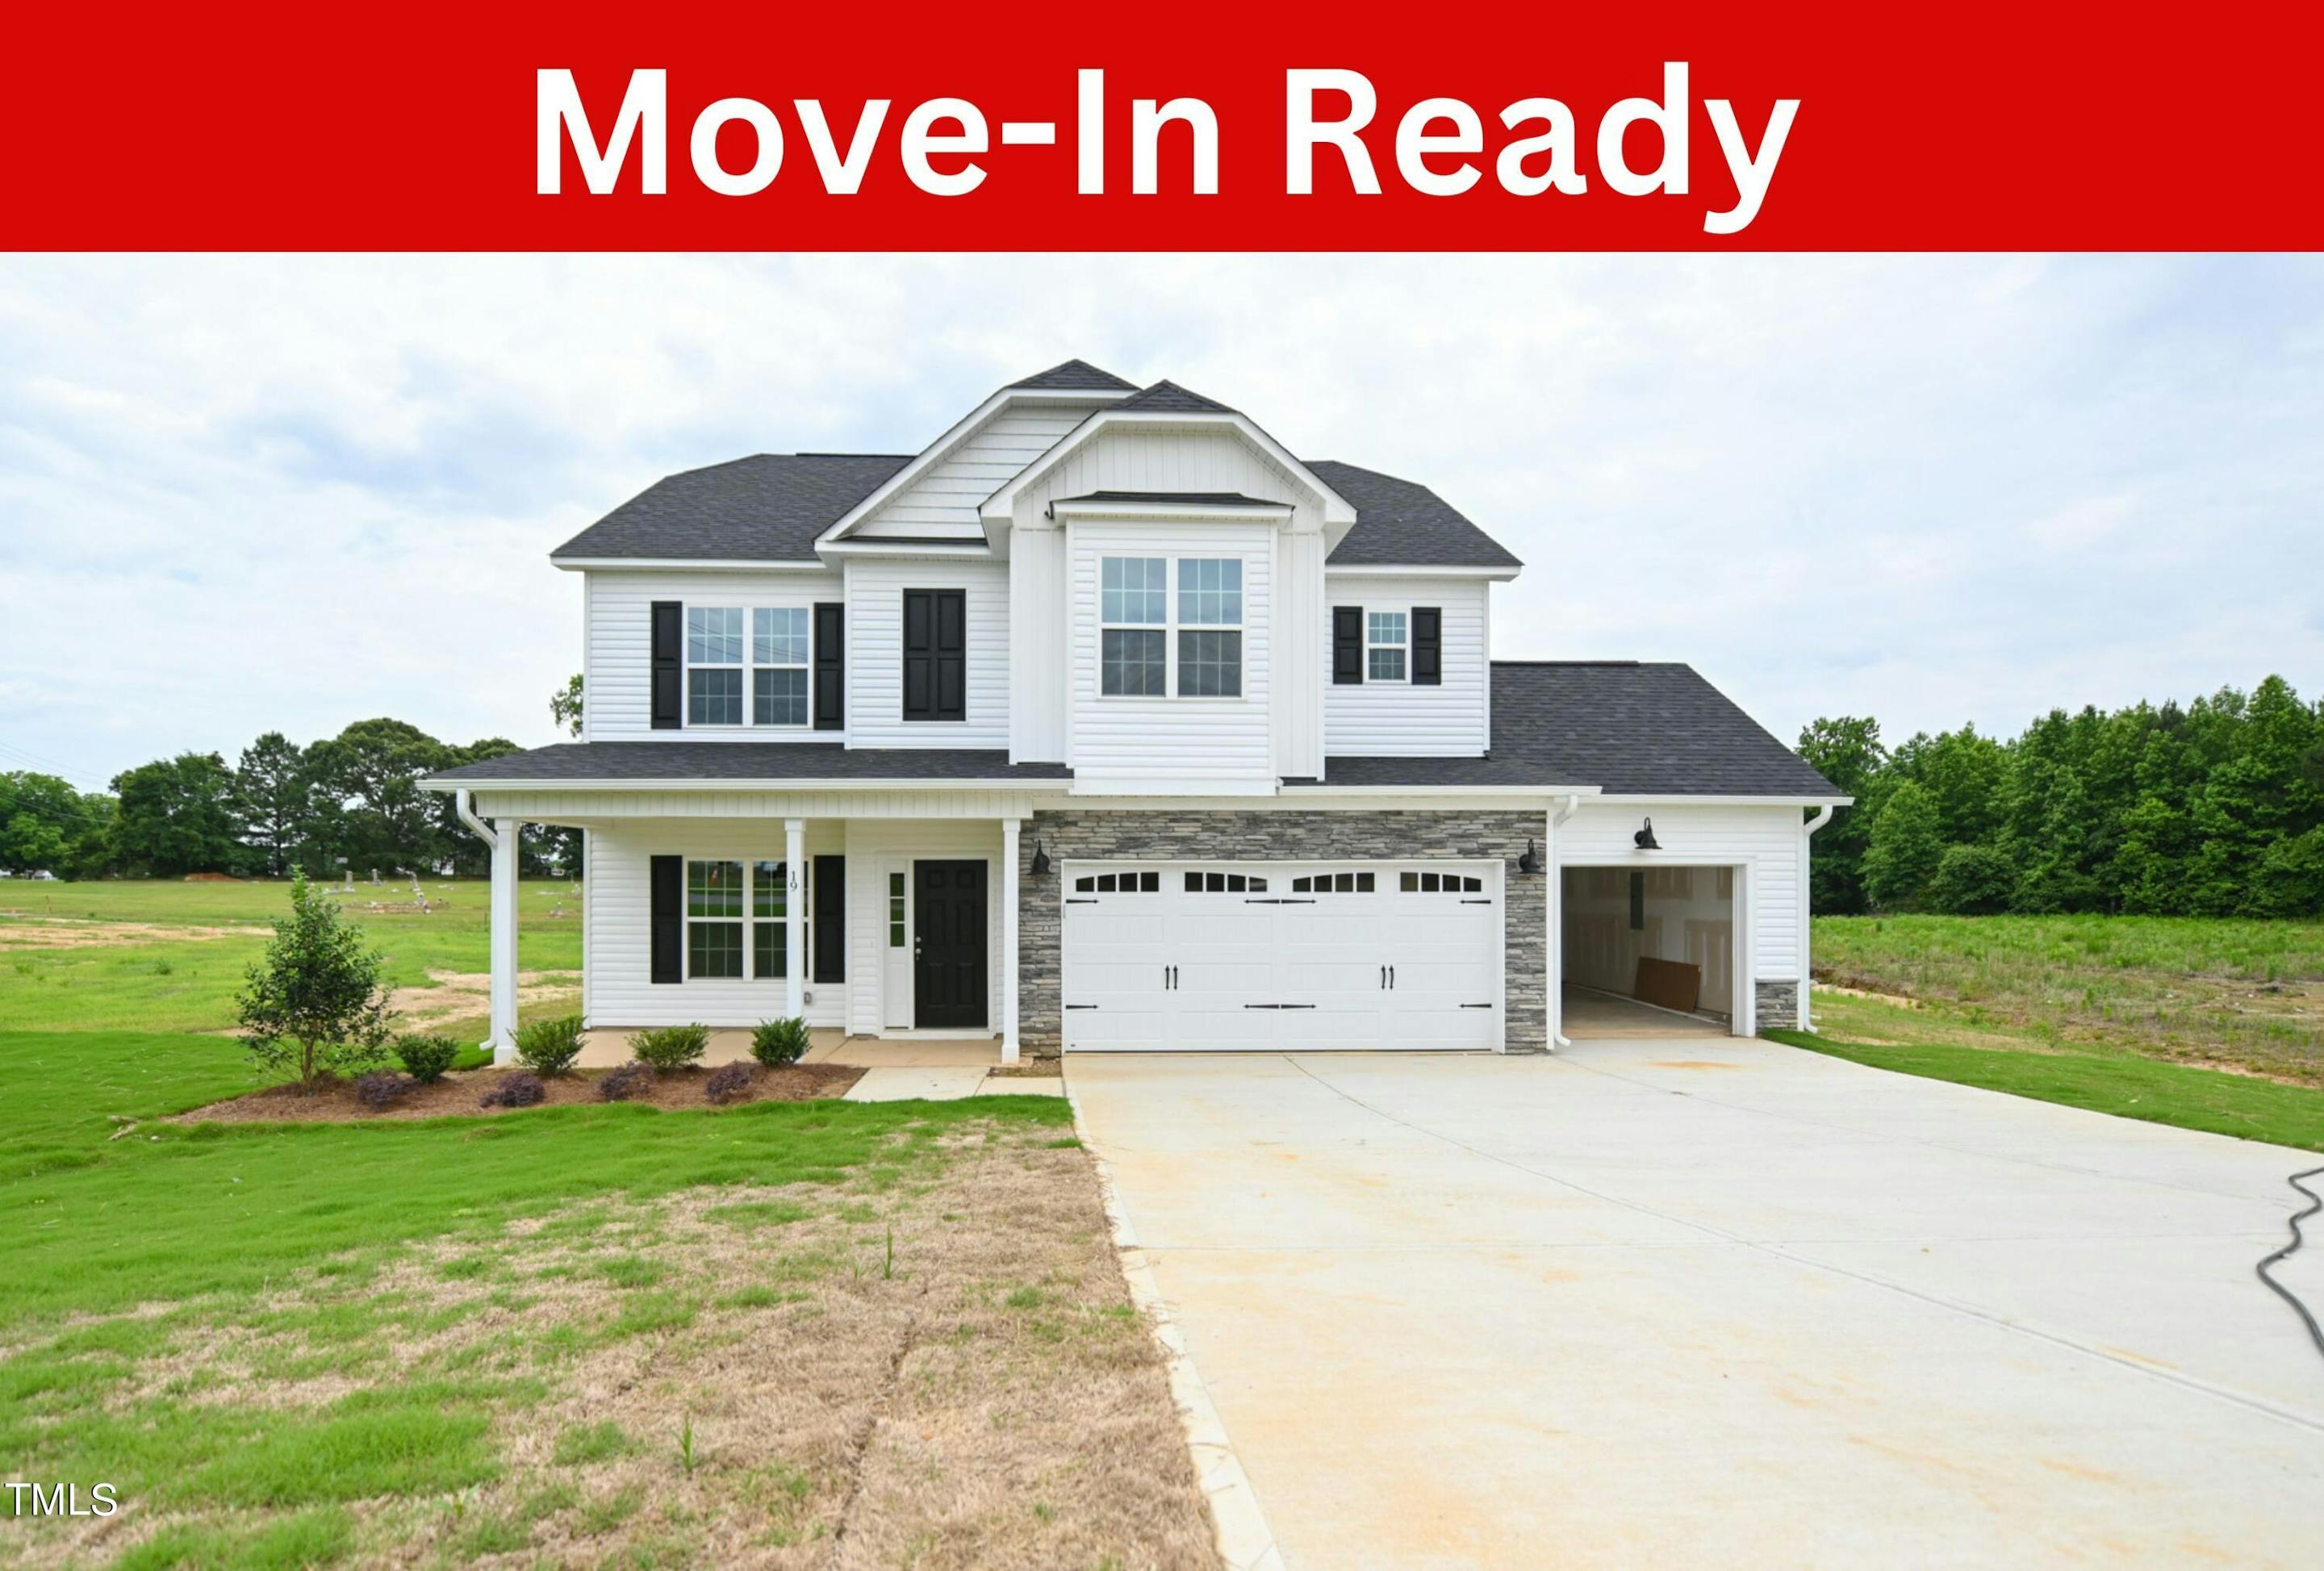 Move In Ready (11)